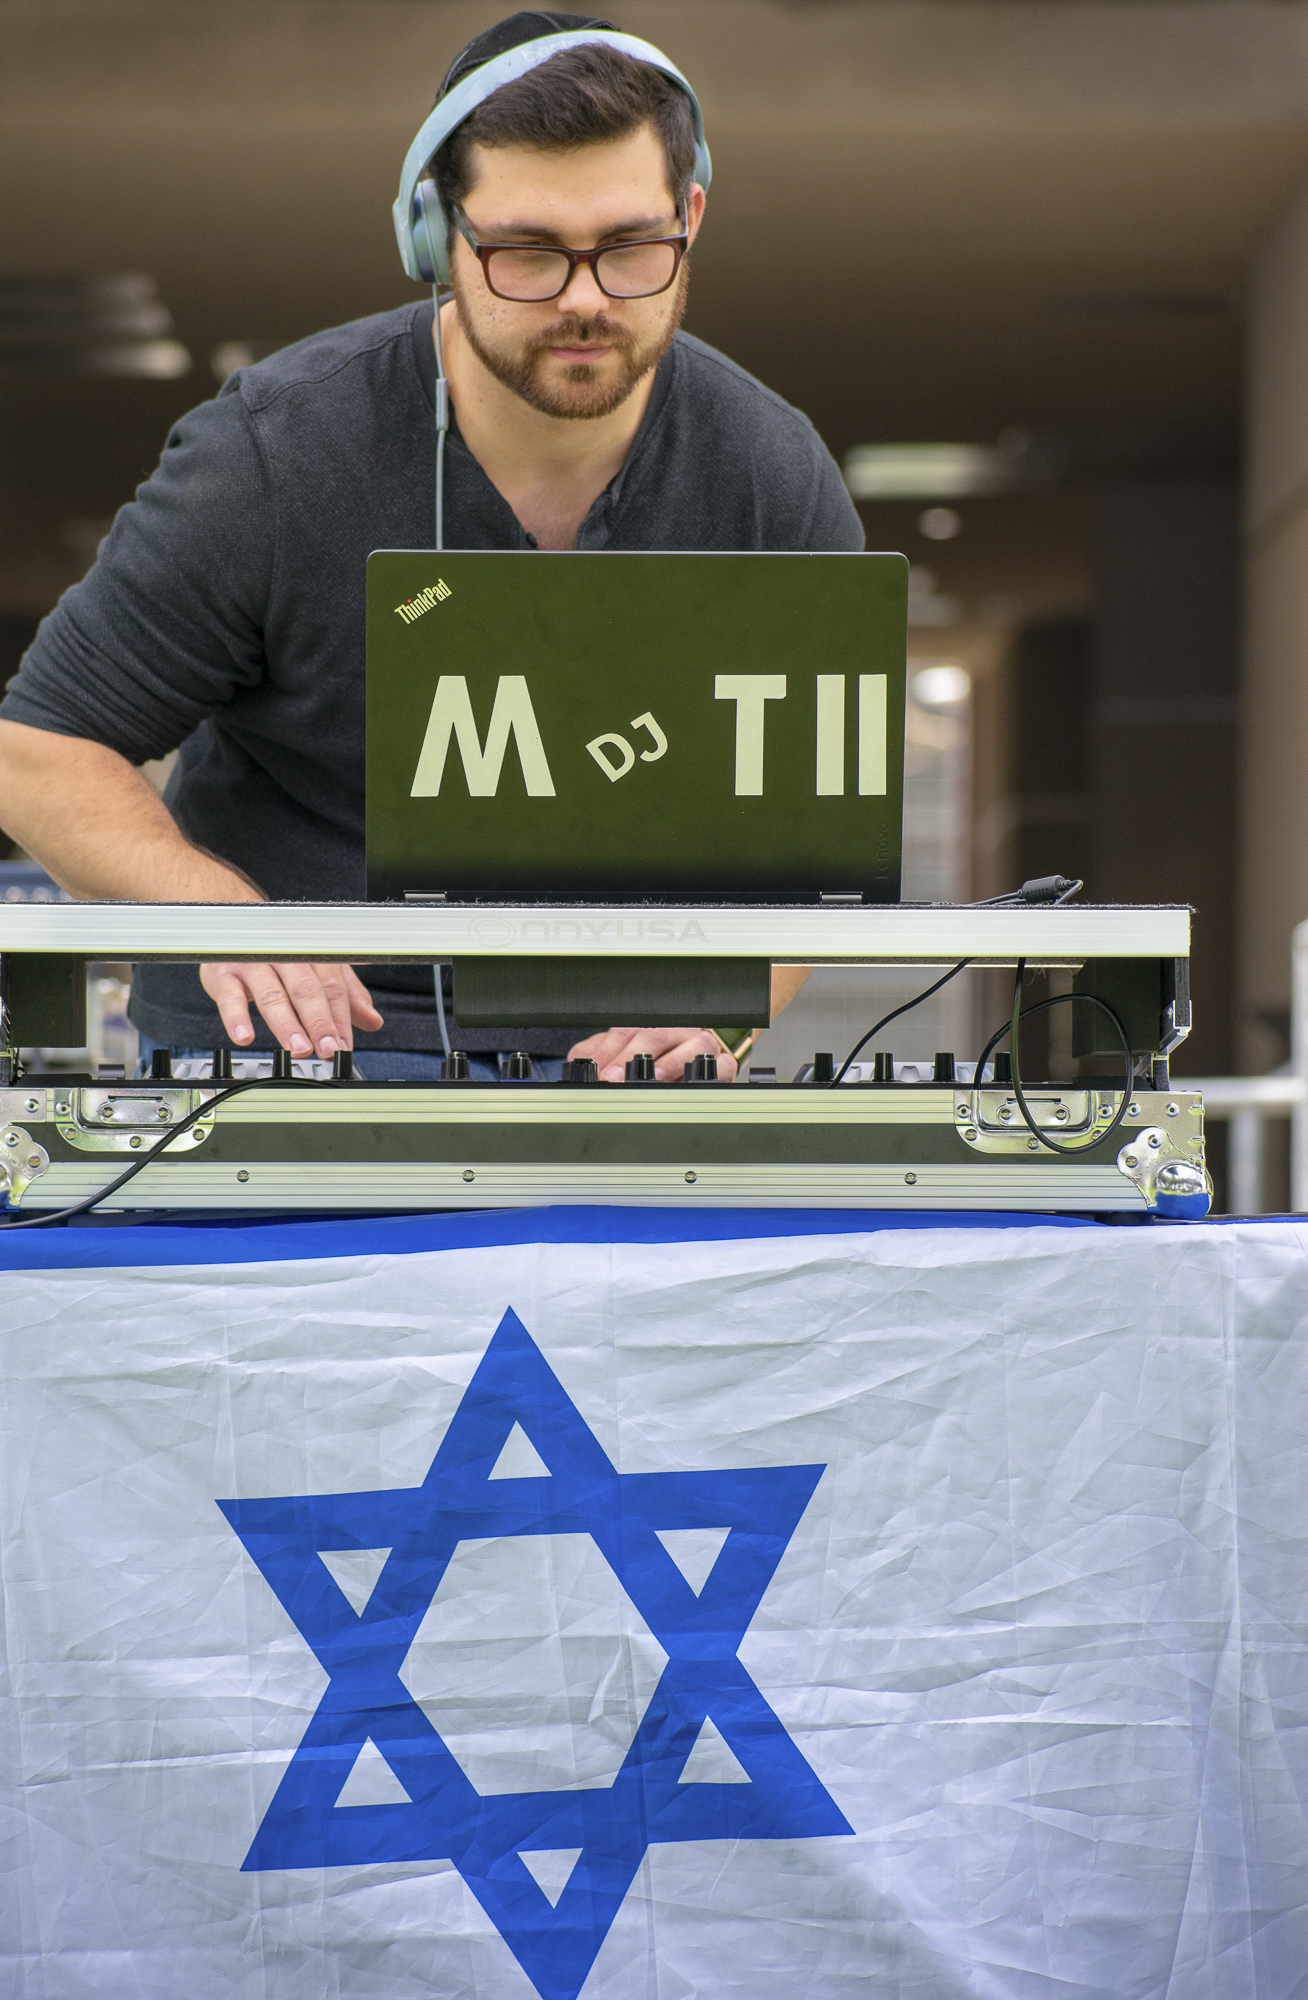  DJ Moti, otherwise known as David Leibman, a student at Santa Monica College, plays Israeli music during an event put on by the Students Supporting Israel club at Santa Monica College on Thursday, May 10 in Santa Monica, California. The event was a 